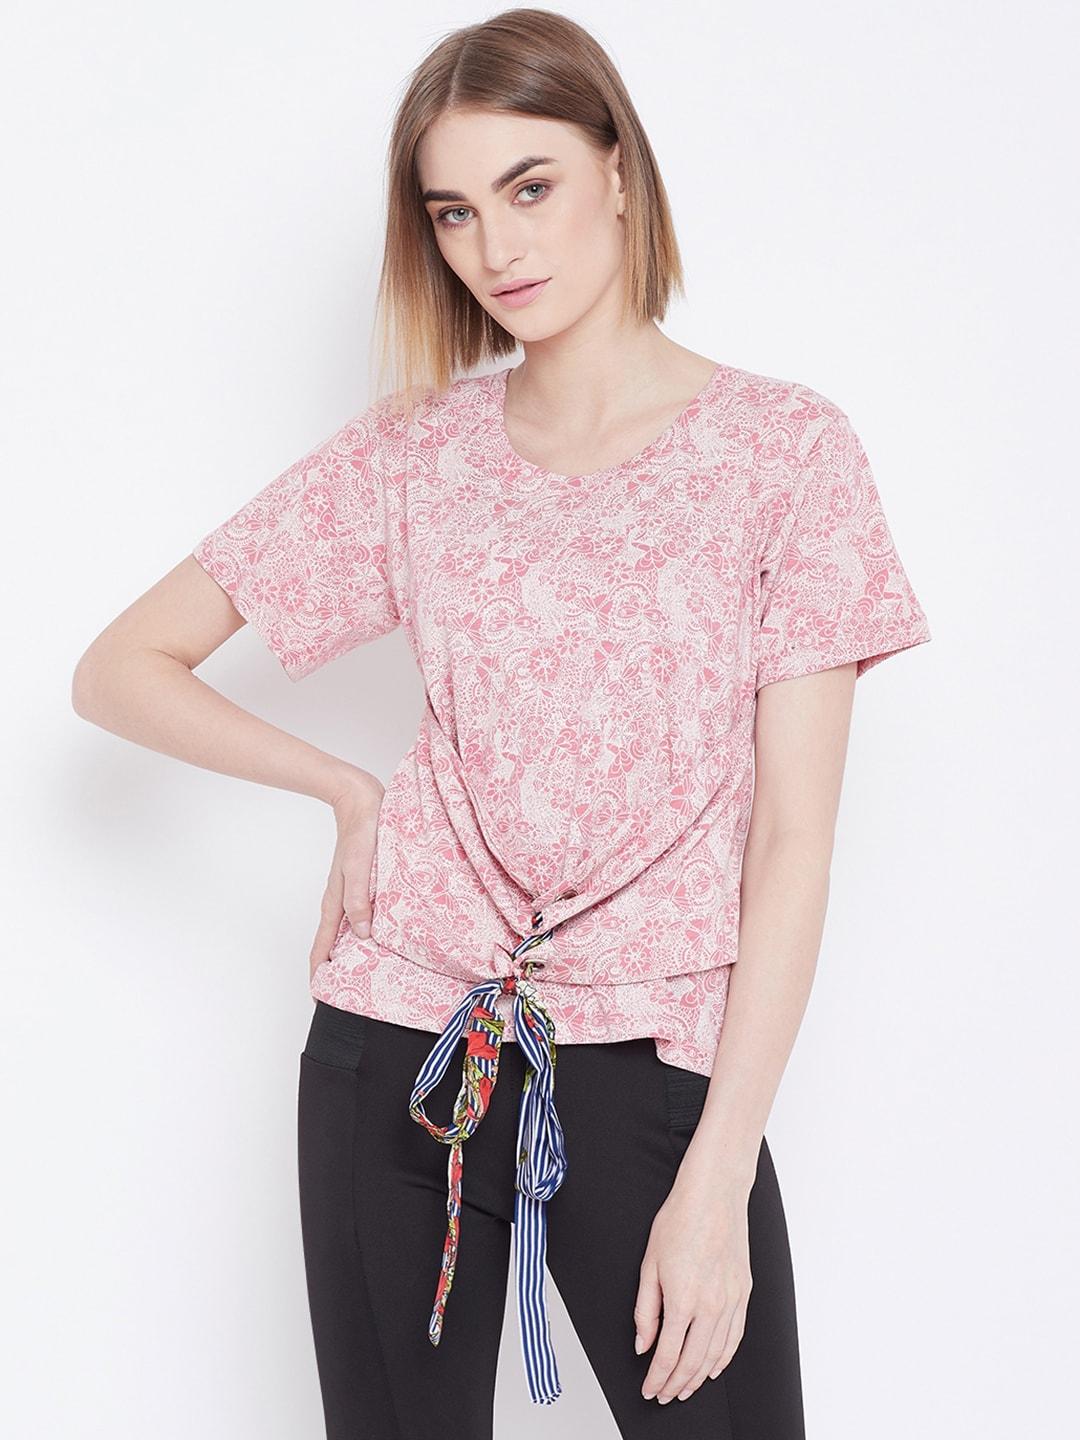 belle-fille-women-pink-&-white-printed-top